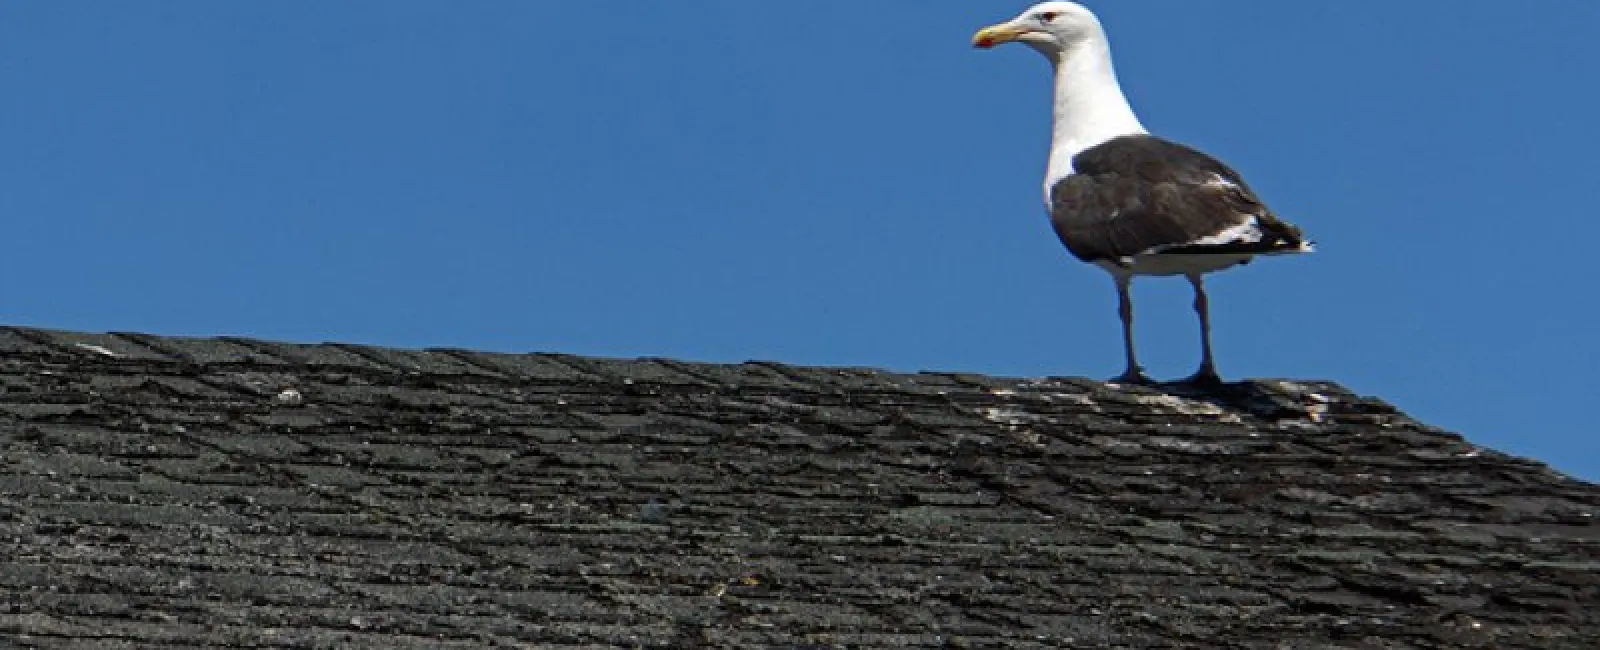 Roof damage from birds: Yes, it’s a real problem